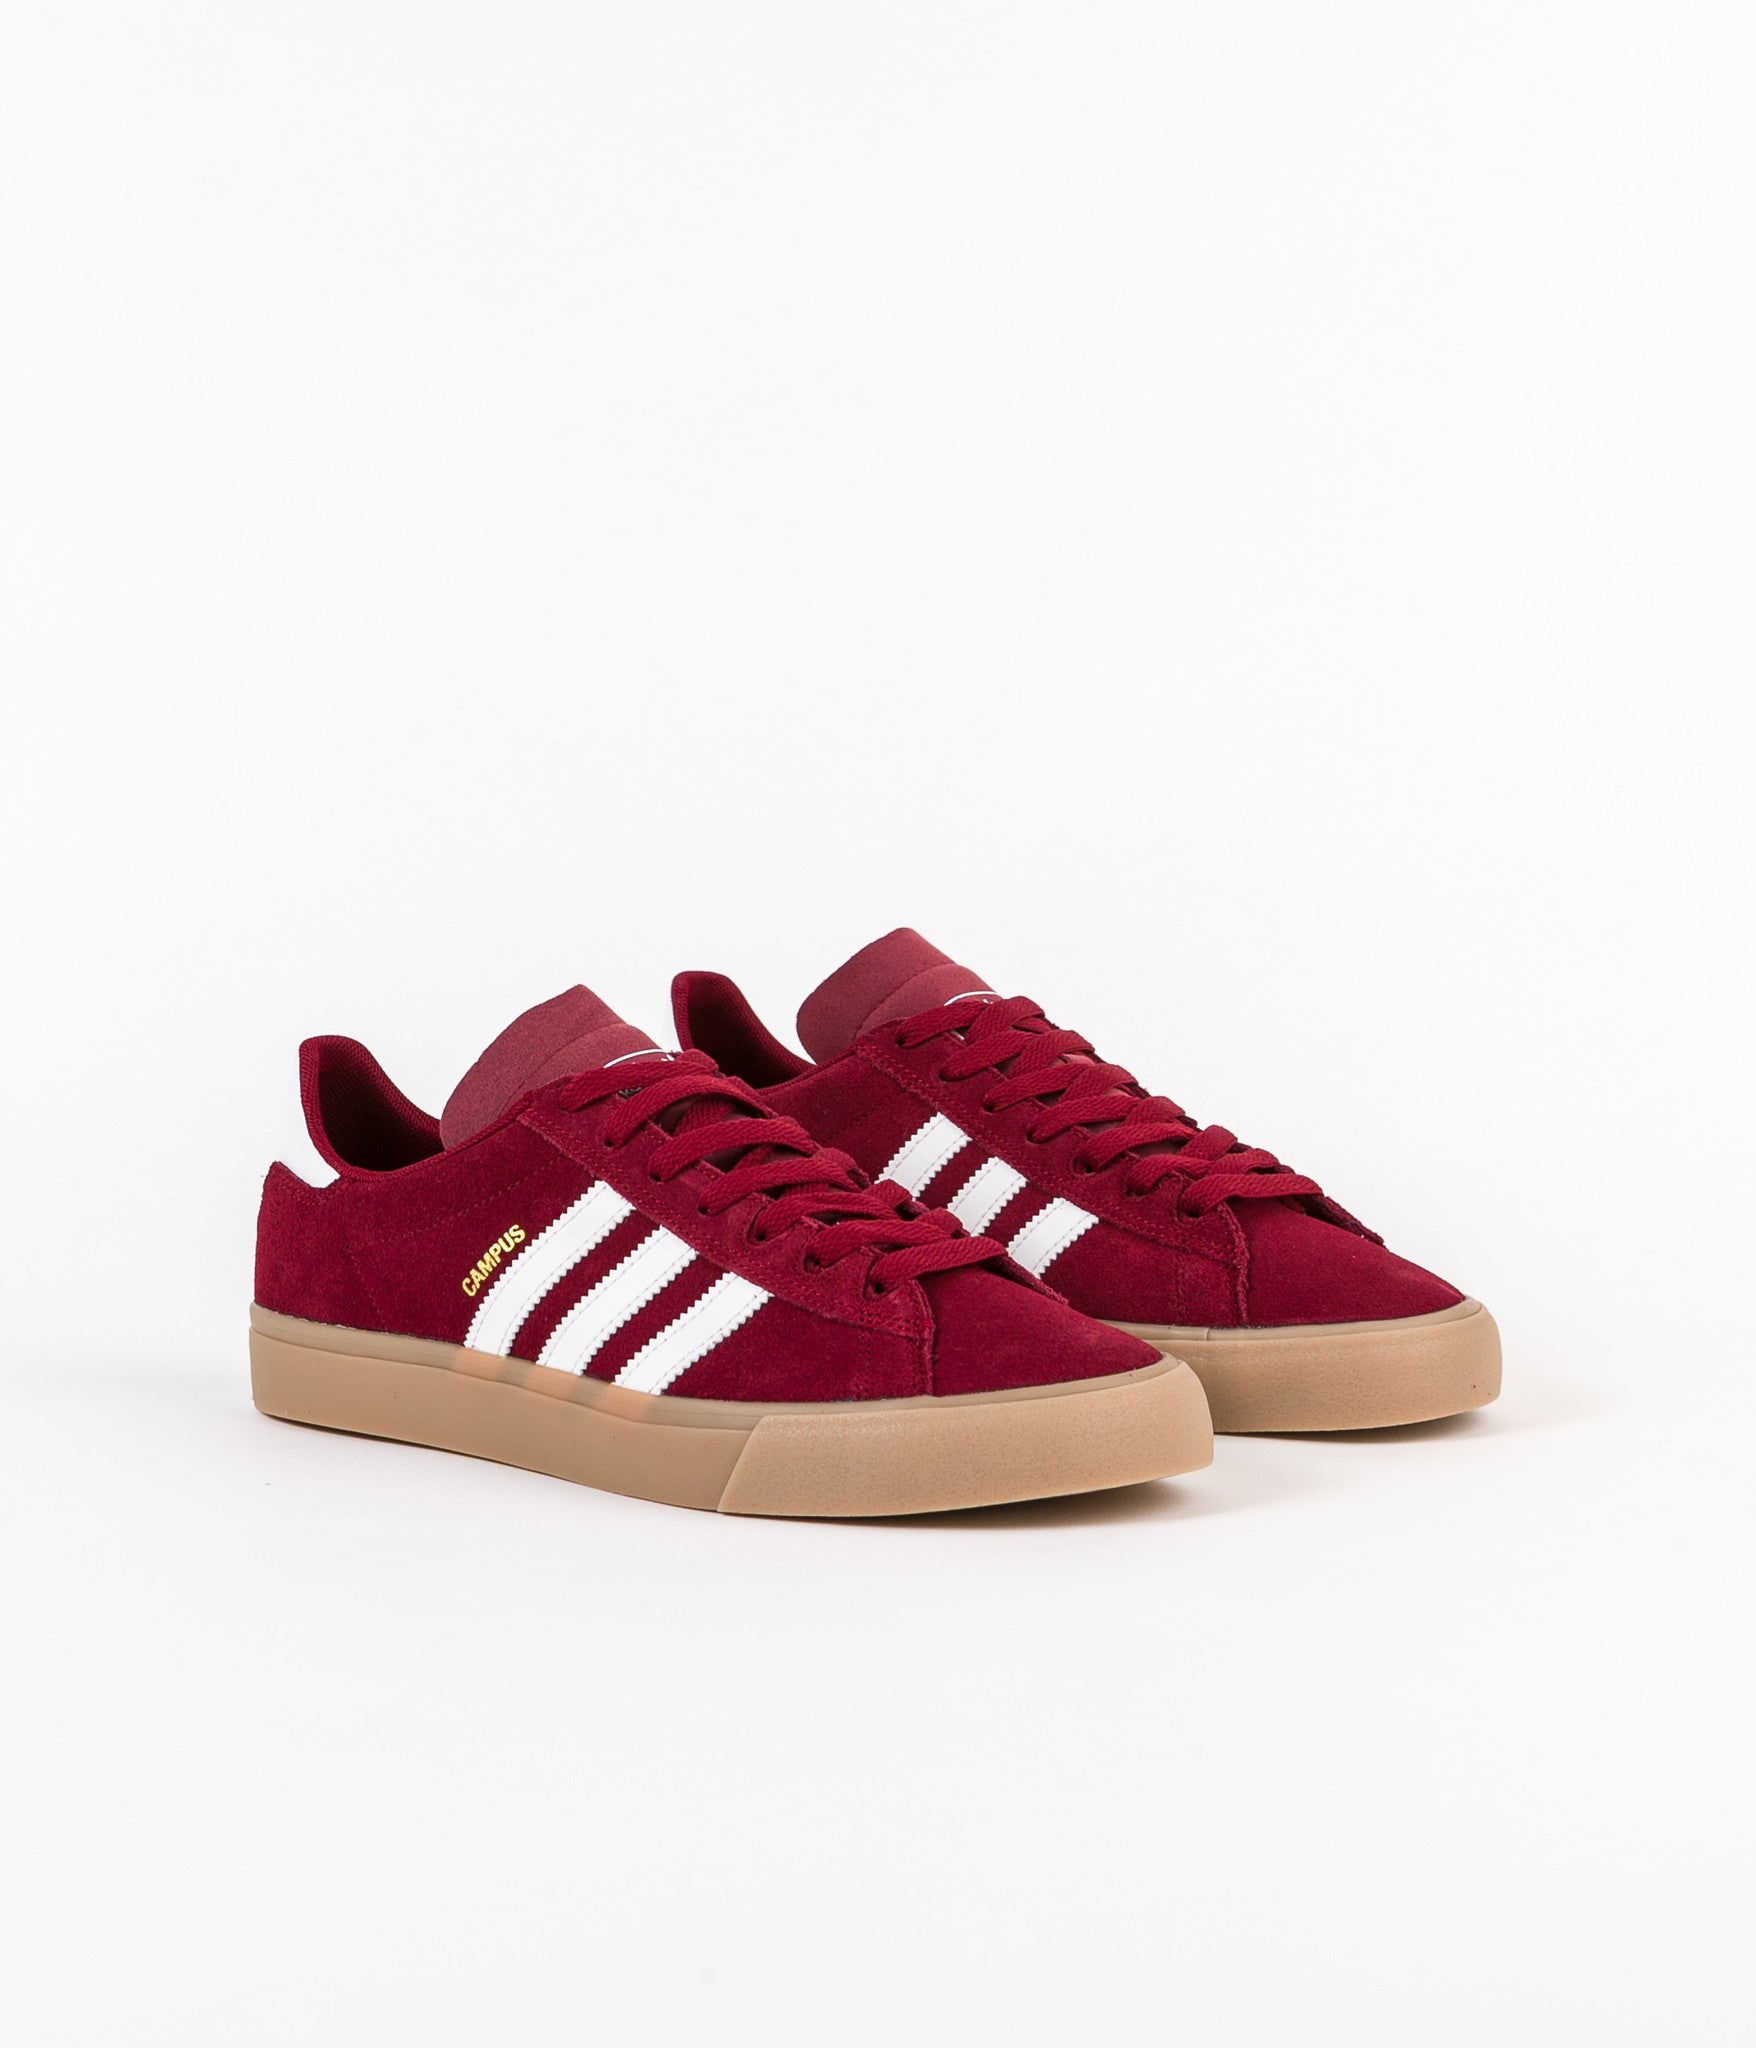 adidas campus vulc white red | Great 